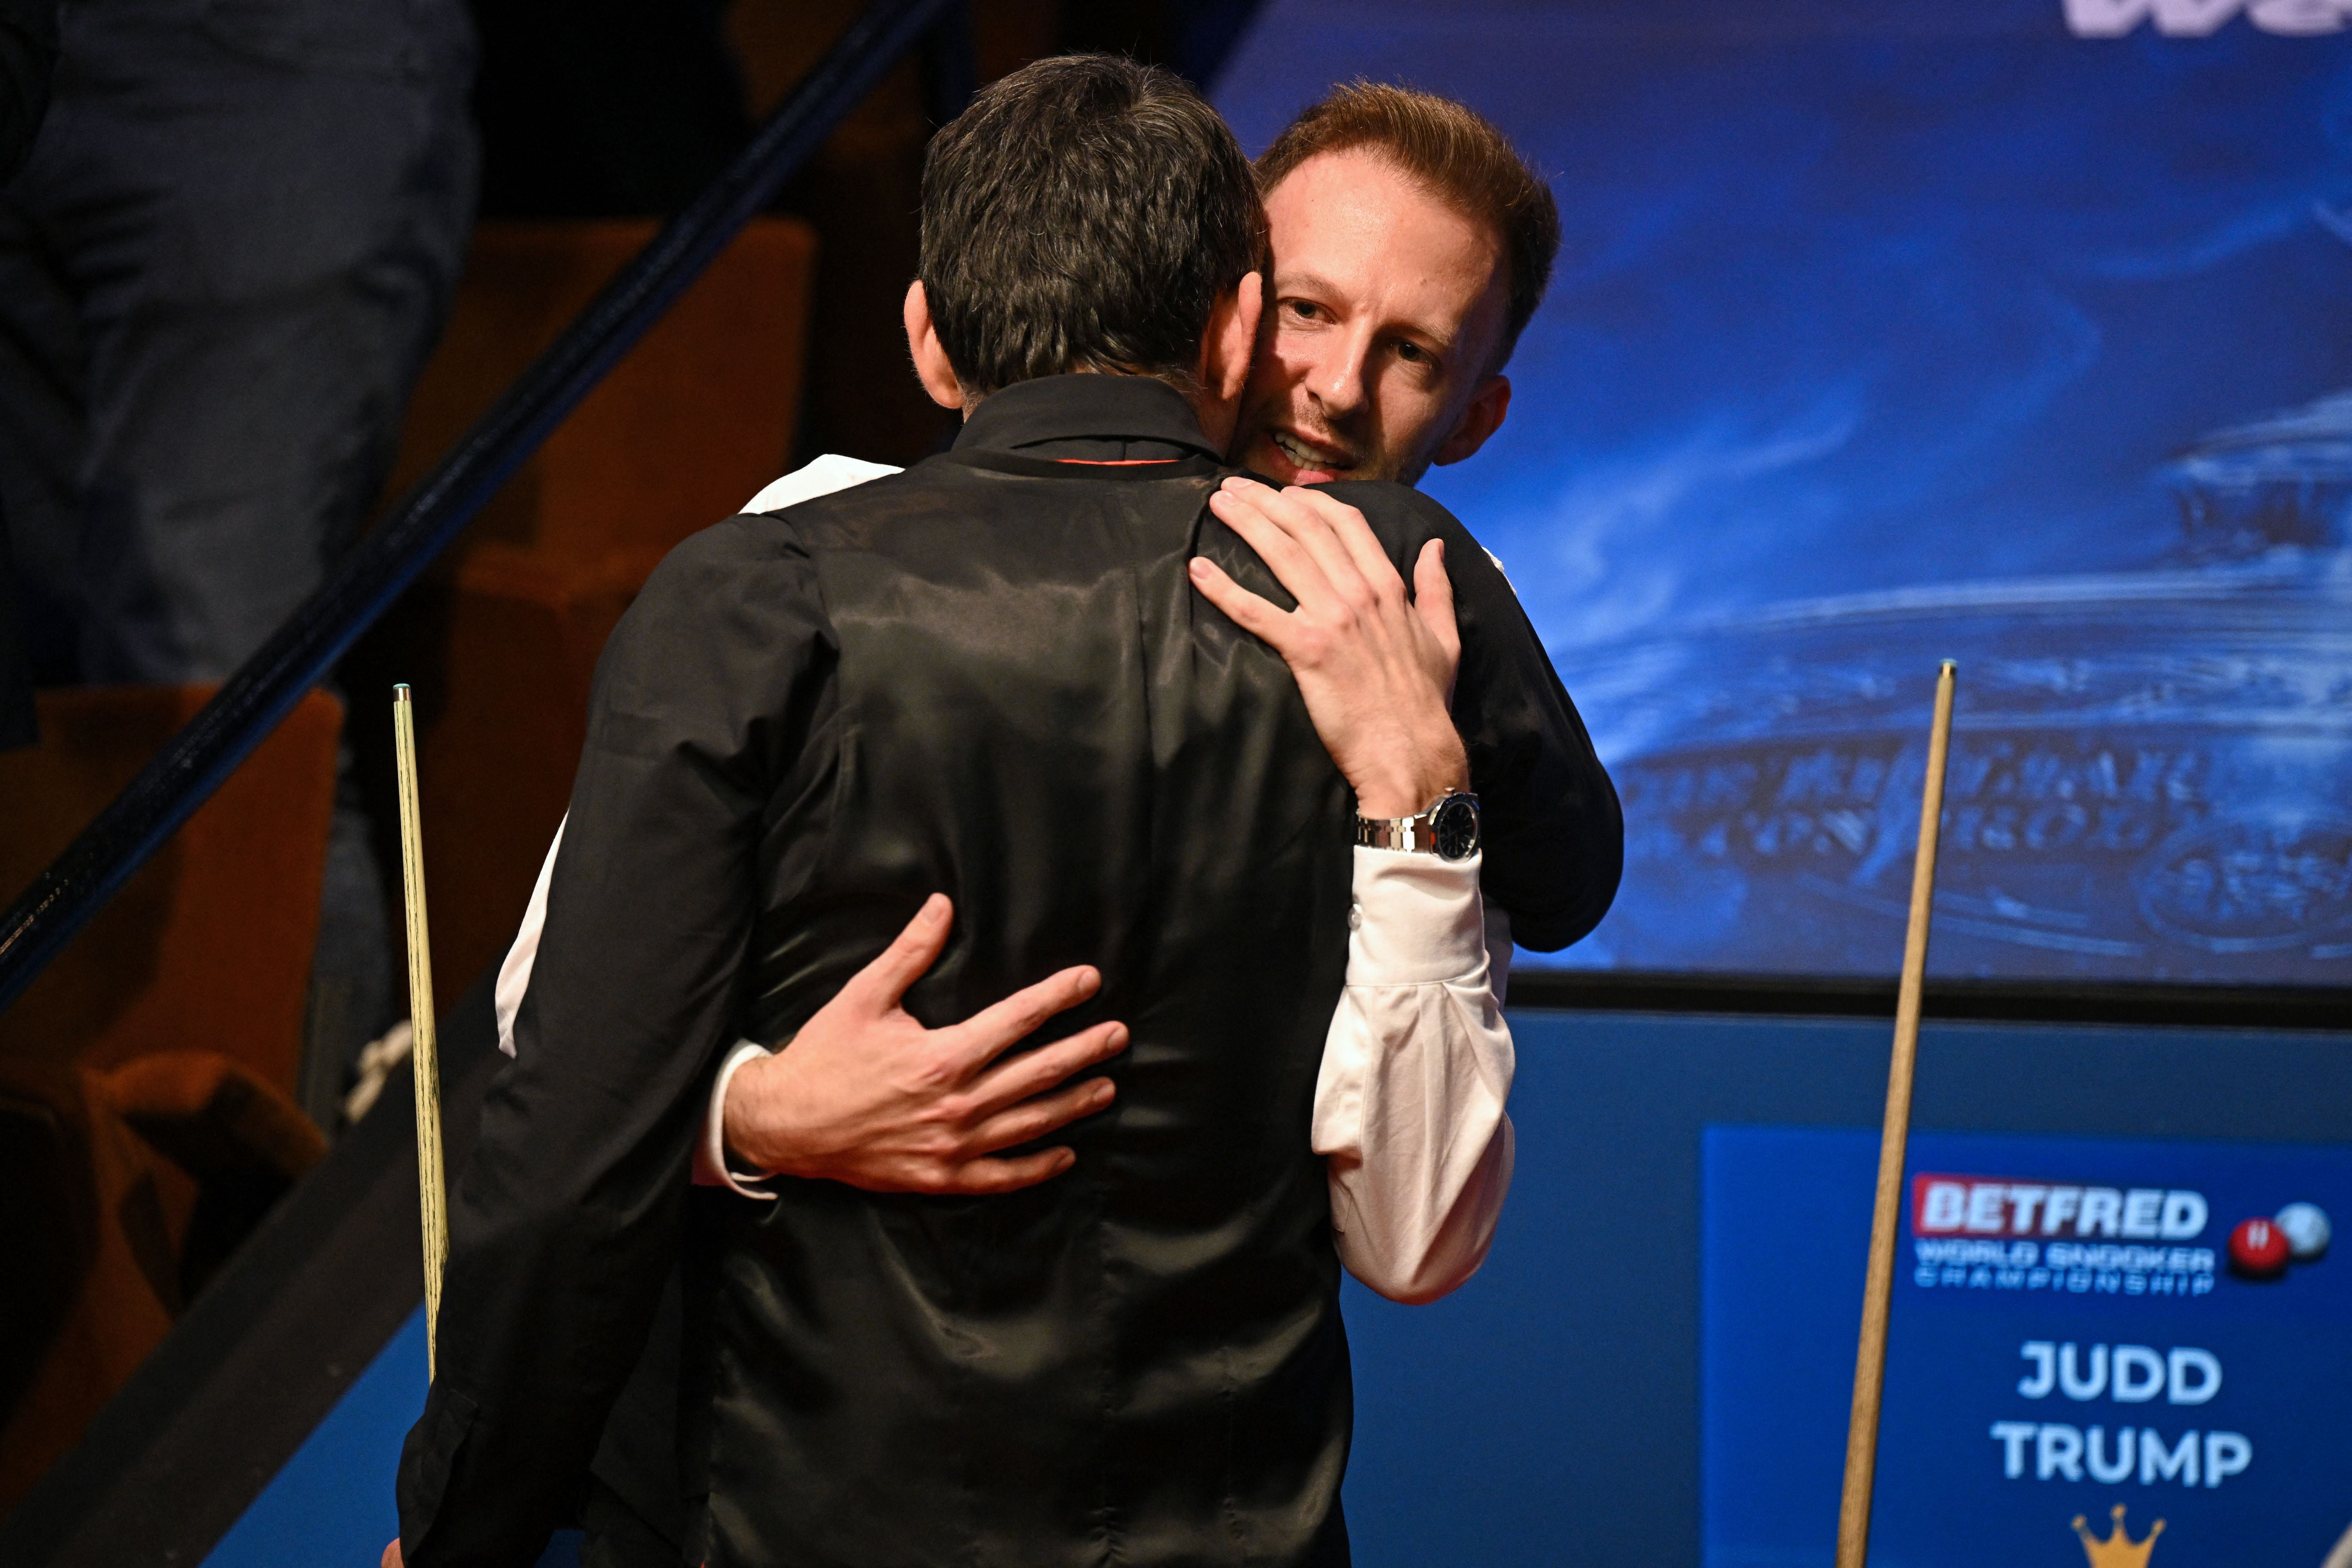 Ronnie O’Sullivan’s long hug with Judd Trump after winning his seventh world title in 2022 went down as an iconic Crucible moment